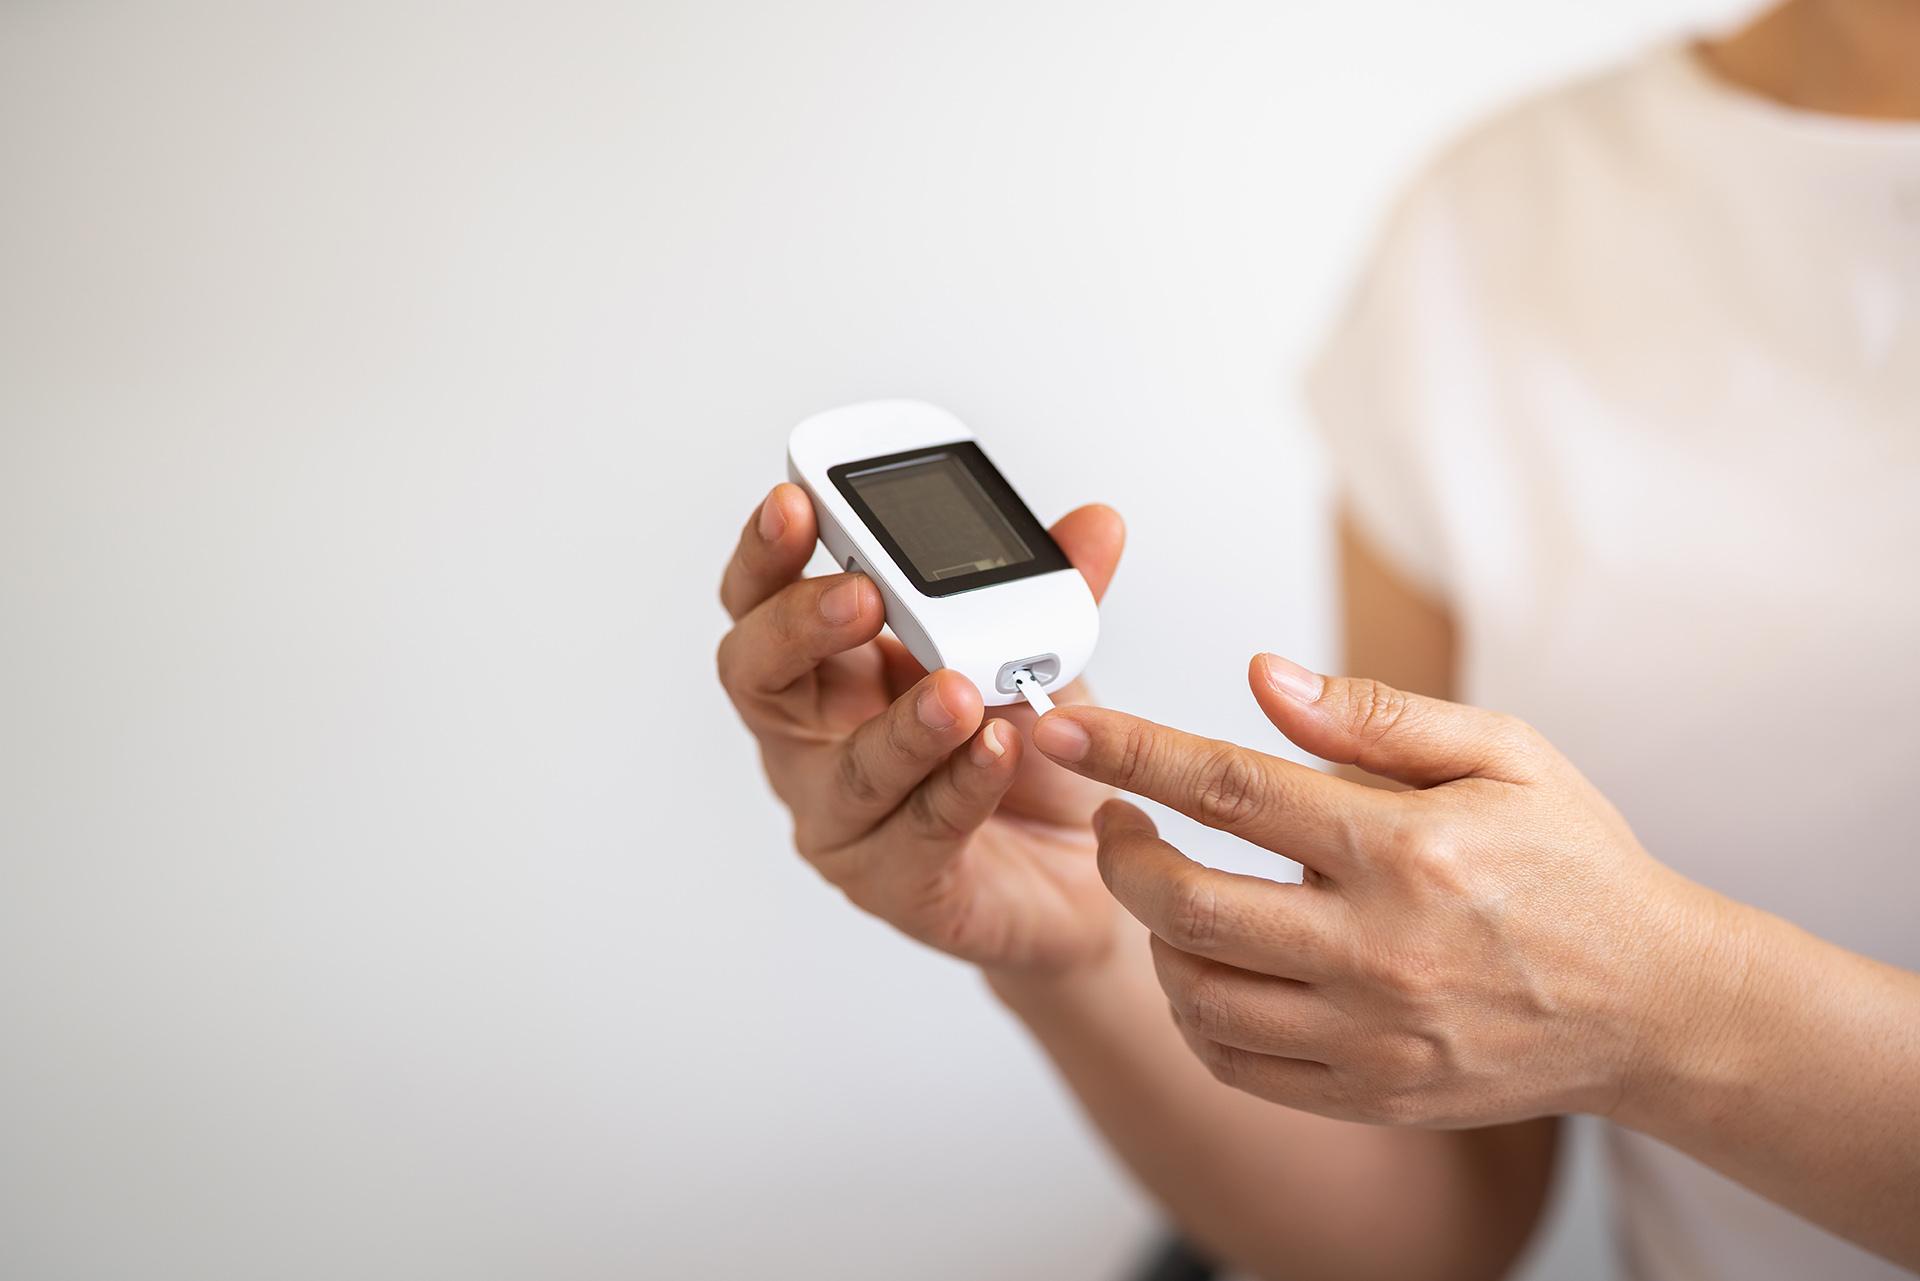 Normal Diabetic Blood Sugar Levels and Why Checking Them is Important